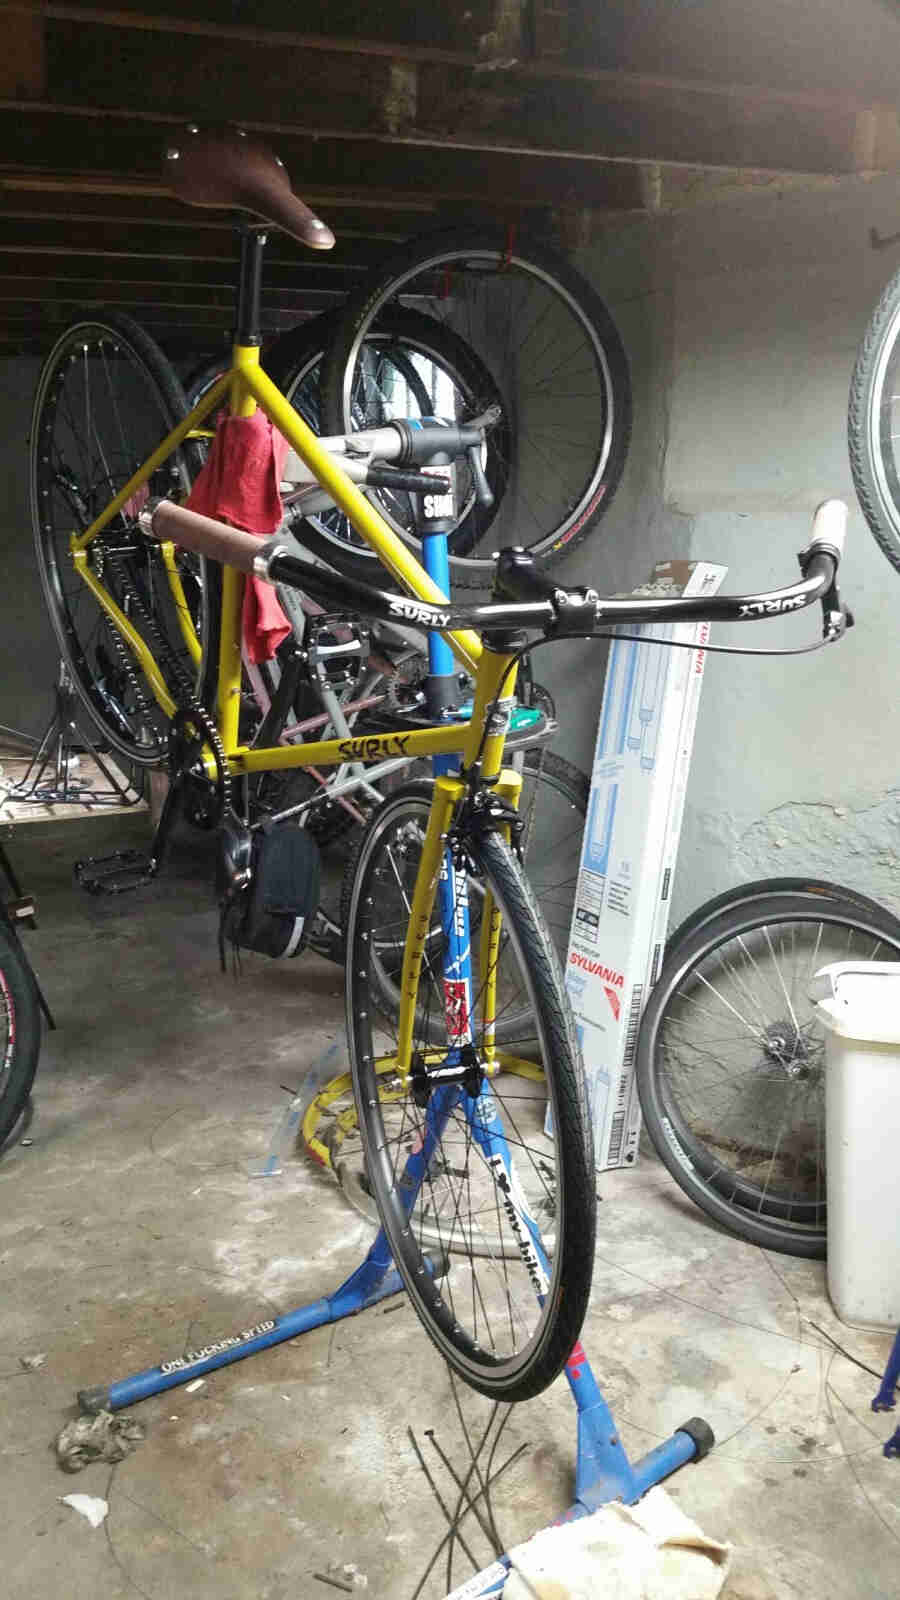 Front right view of a Surly Steamroller bike, yellow, on a bike stand, in a room with bike parts in the background